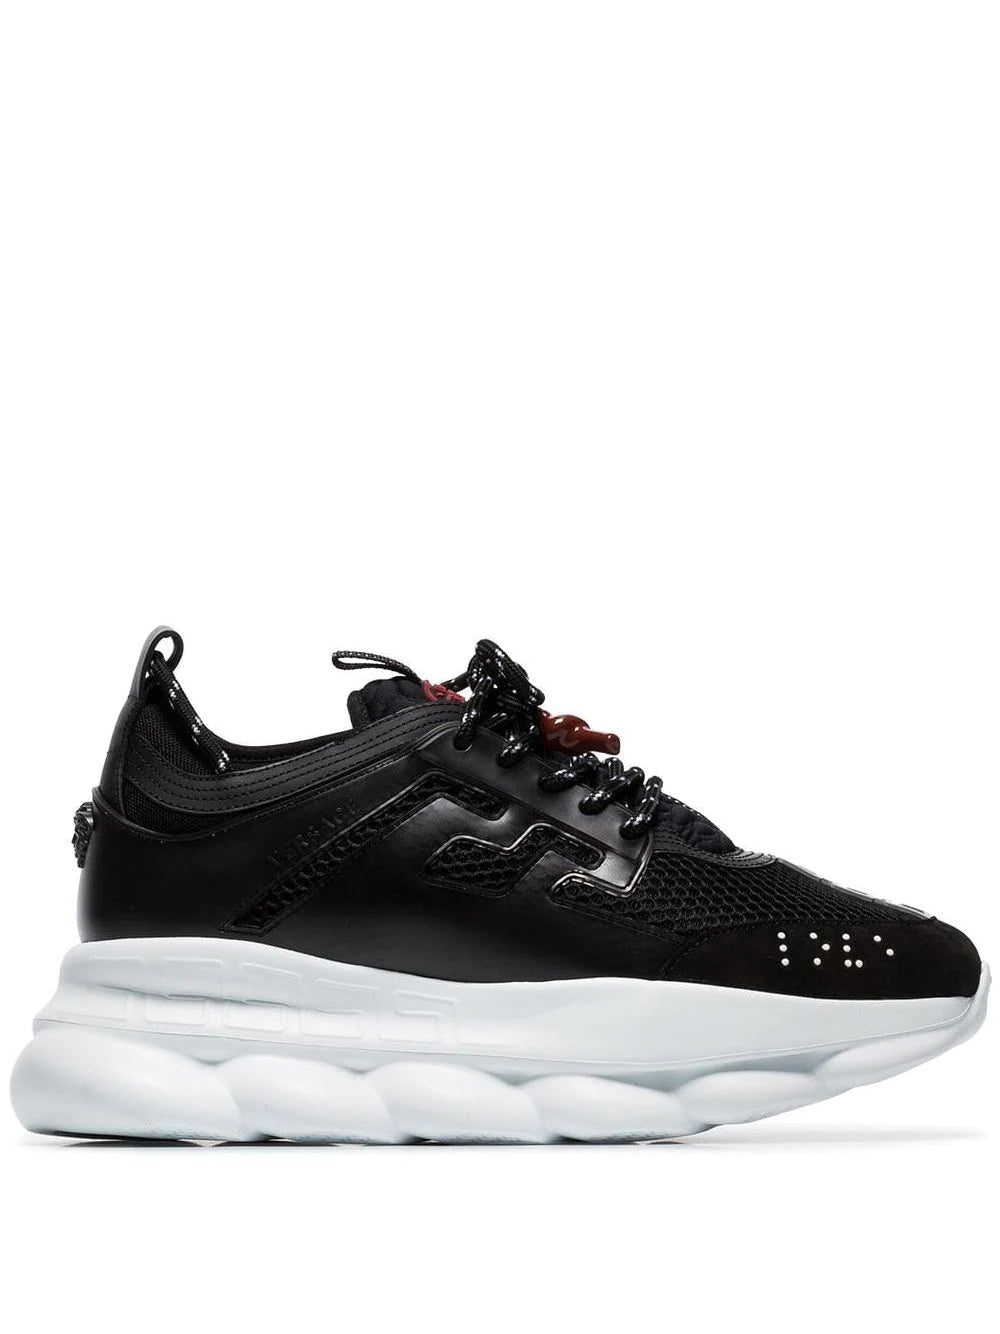 Versace - authentic - Chain Reaction black/ White sneake